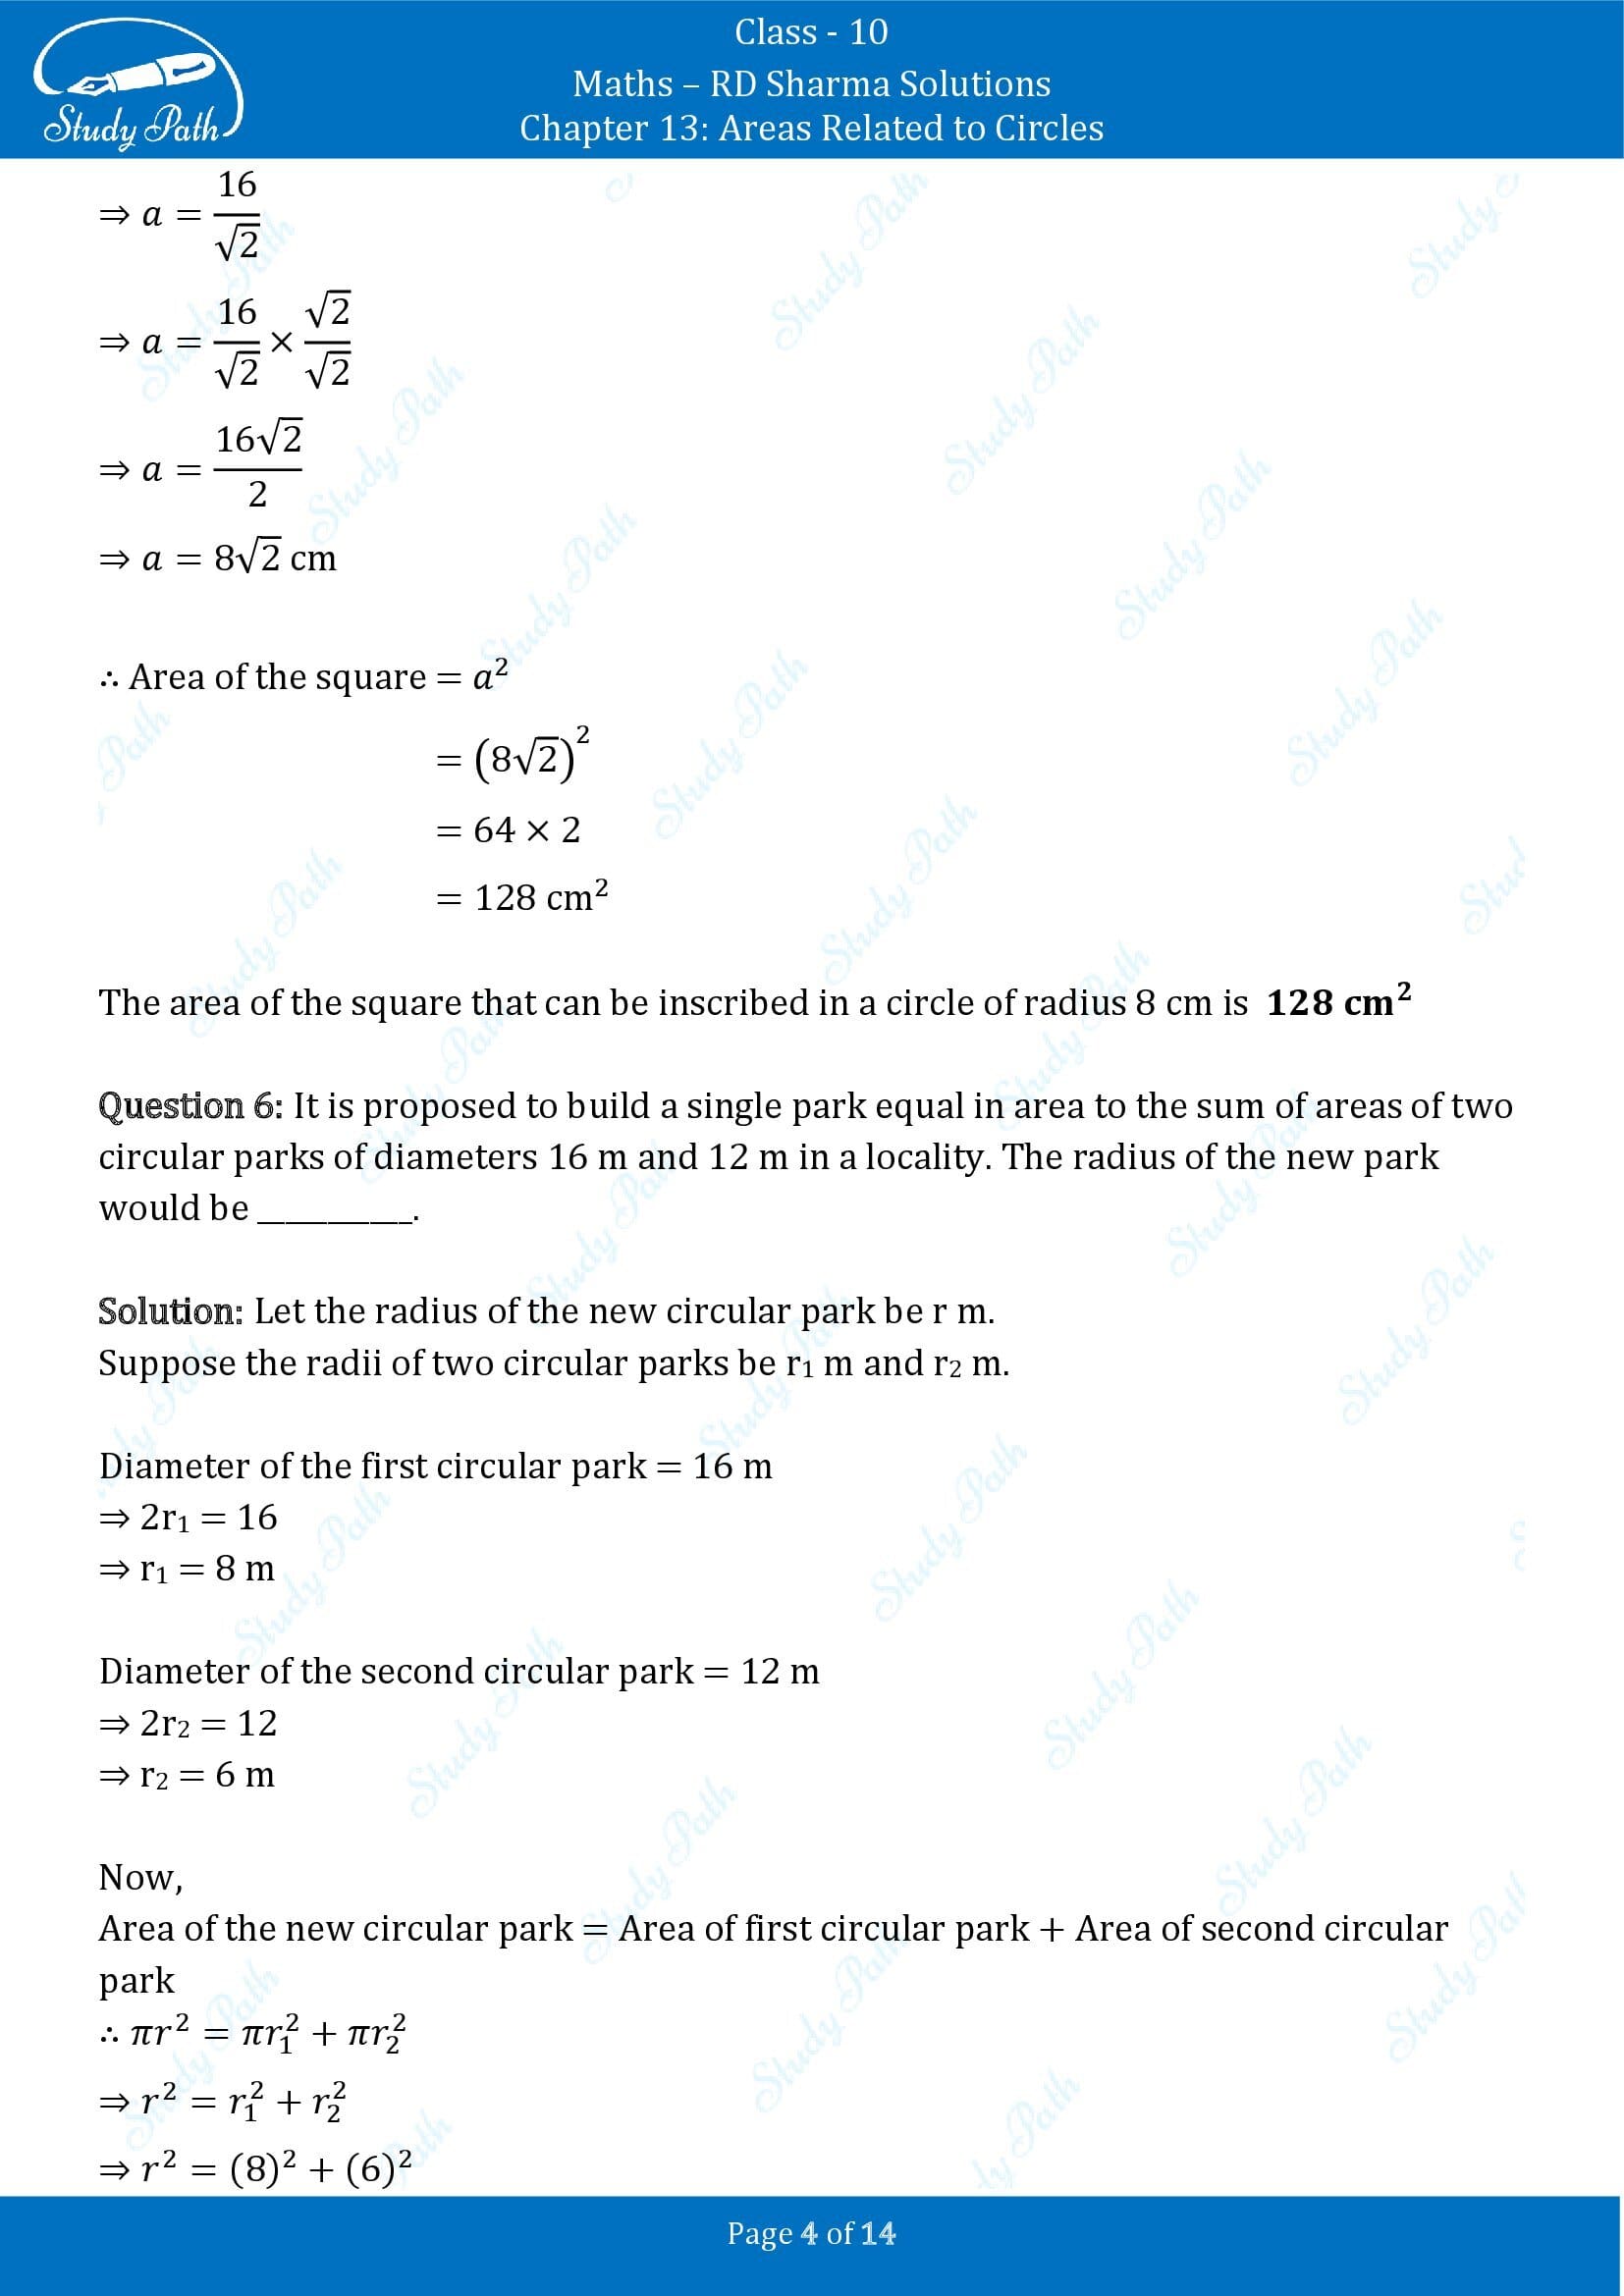 RD Sharma Solutions Class 10 Chapter 13 Areas Related to Circles Fill in the Blank Type Questions FBQs 00004